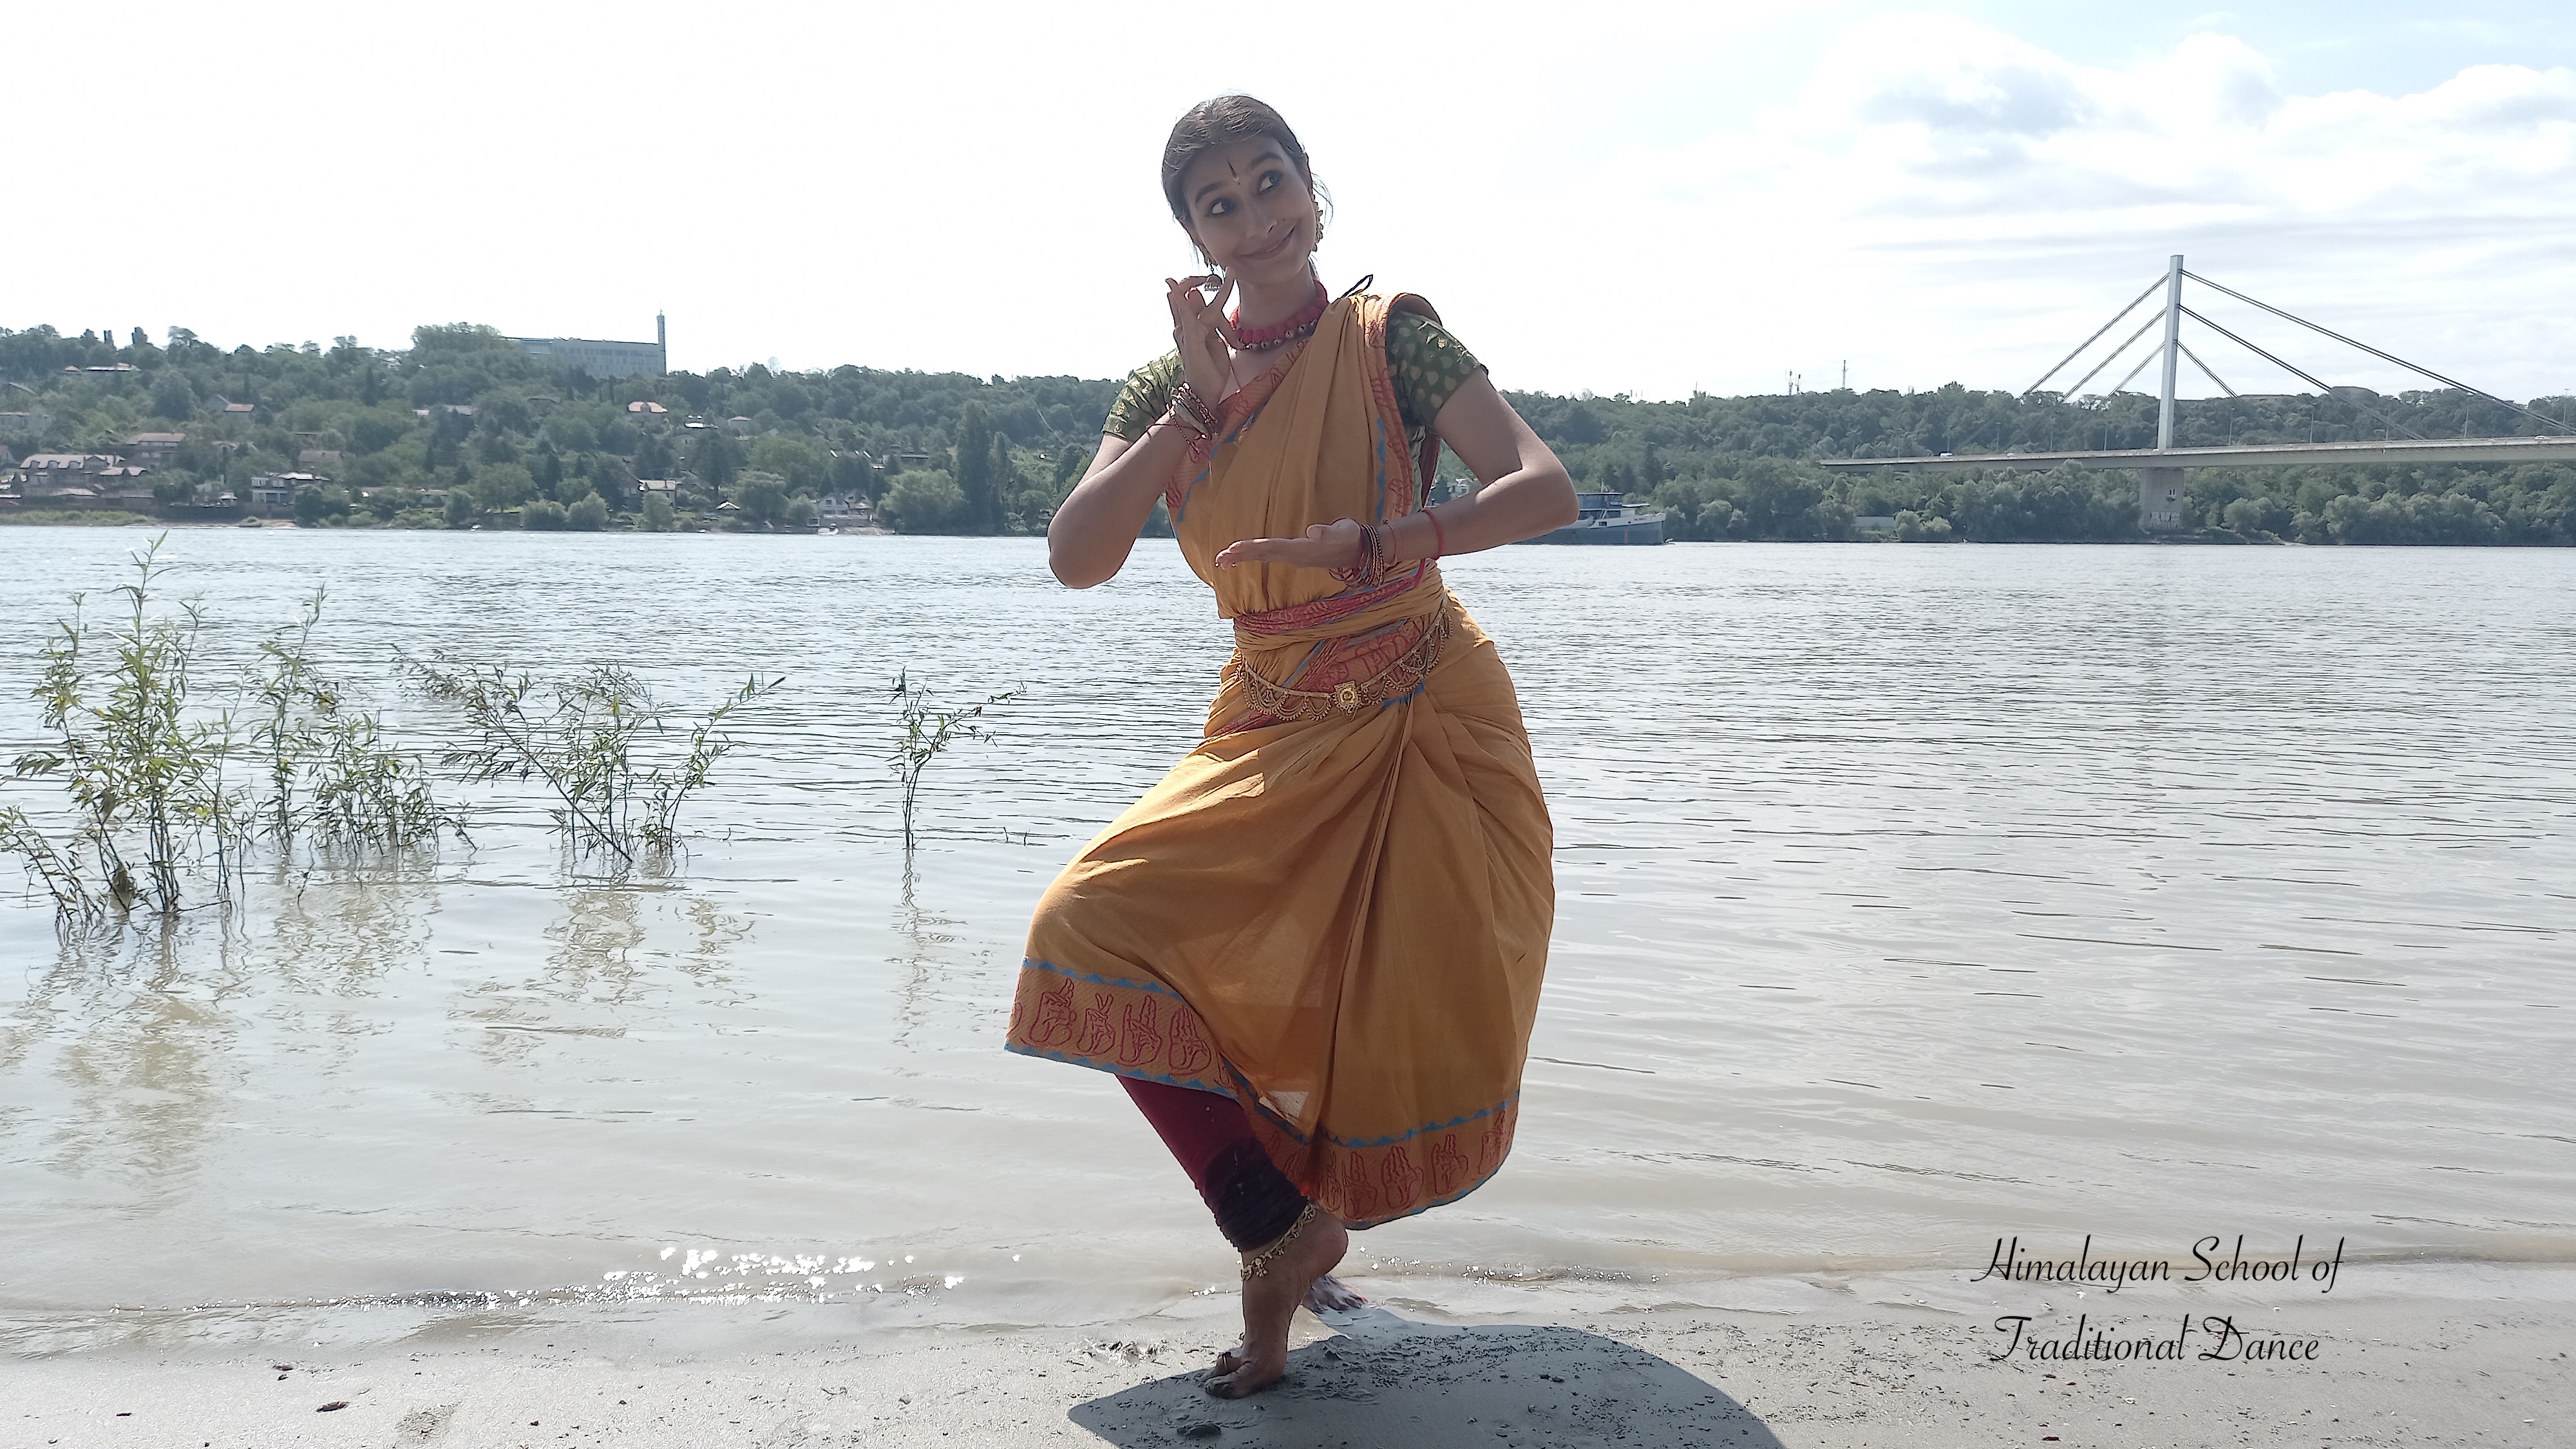 Dancing by the Danube – Taking the first steps on a Journey to Dissolution